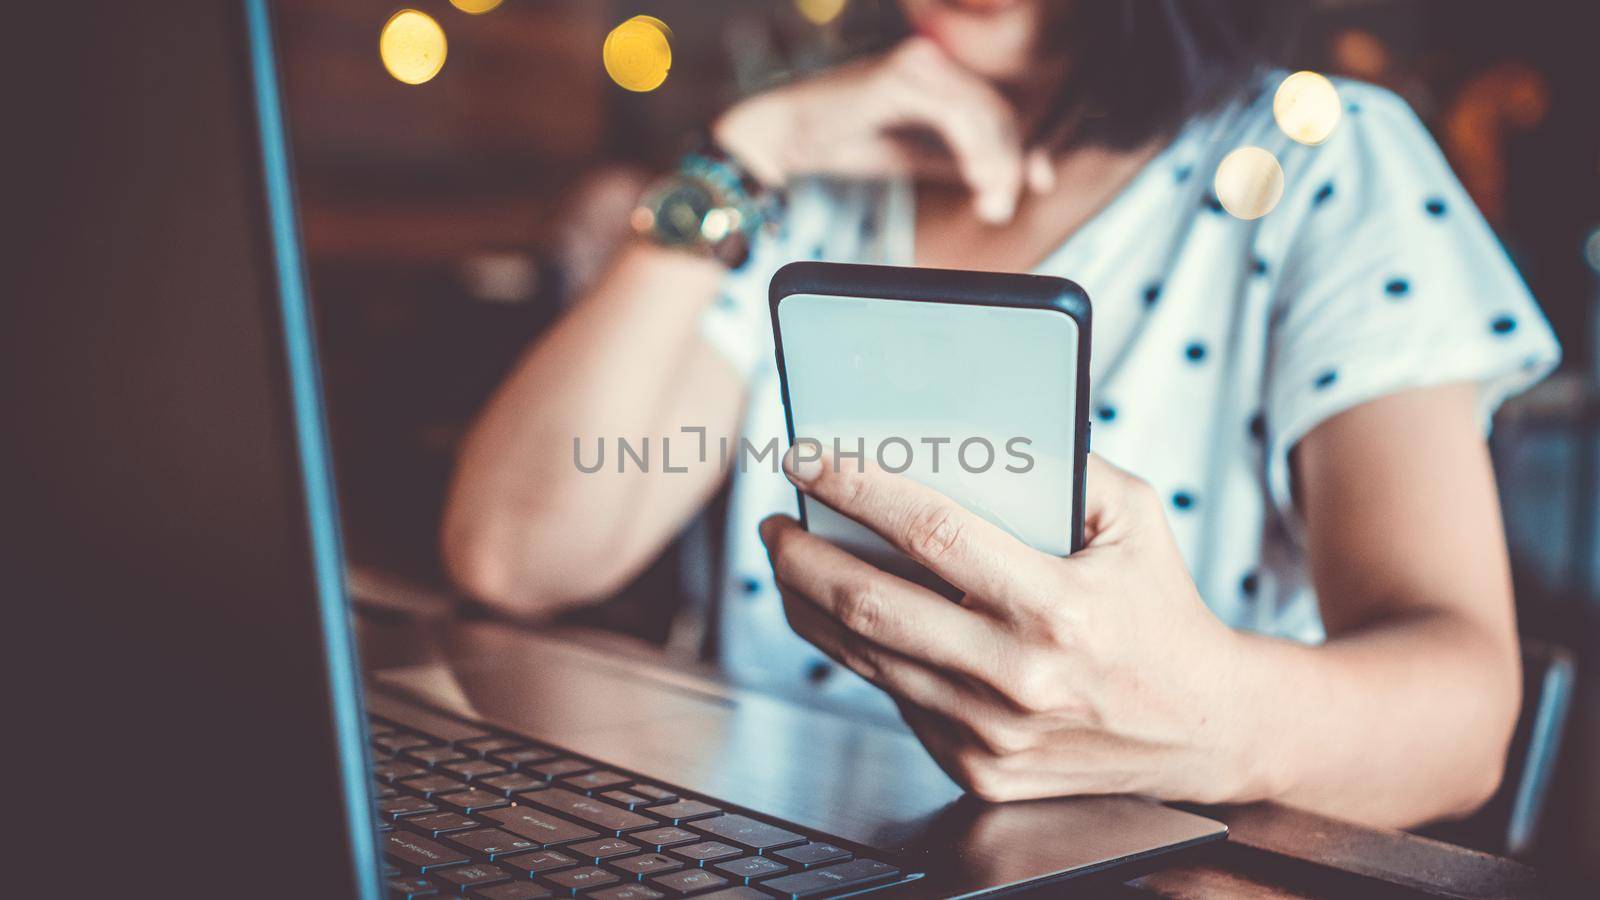 Woman use technology devices smartphone and laptop to work or study do connect communication
 business. by Suwant